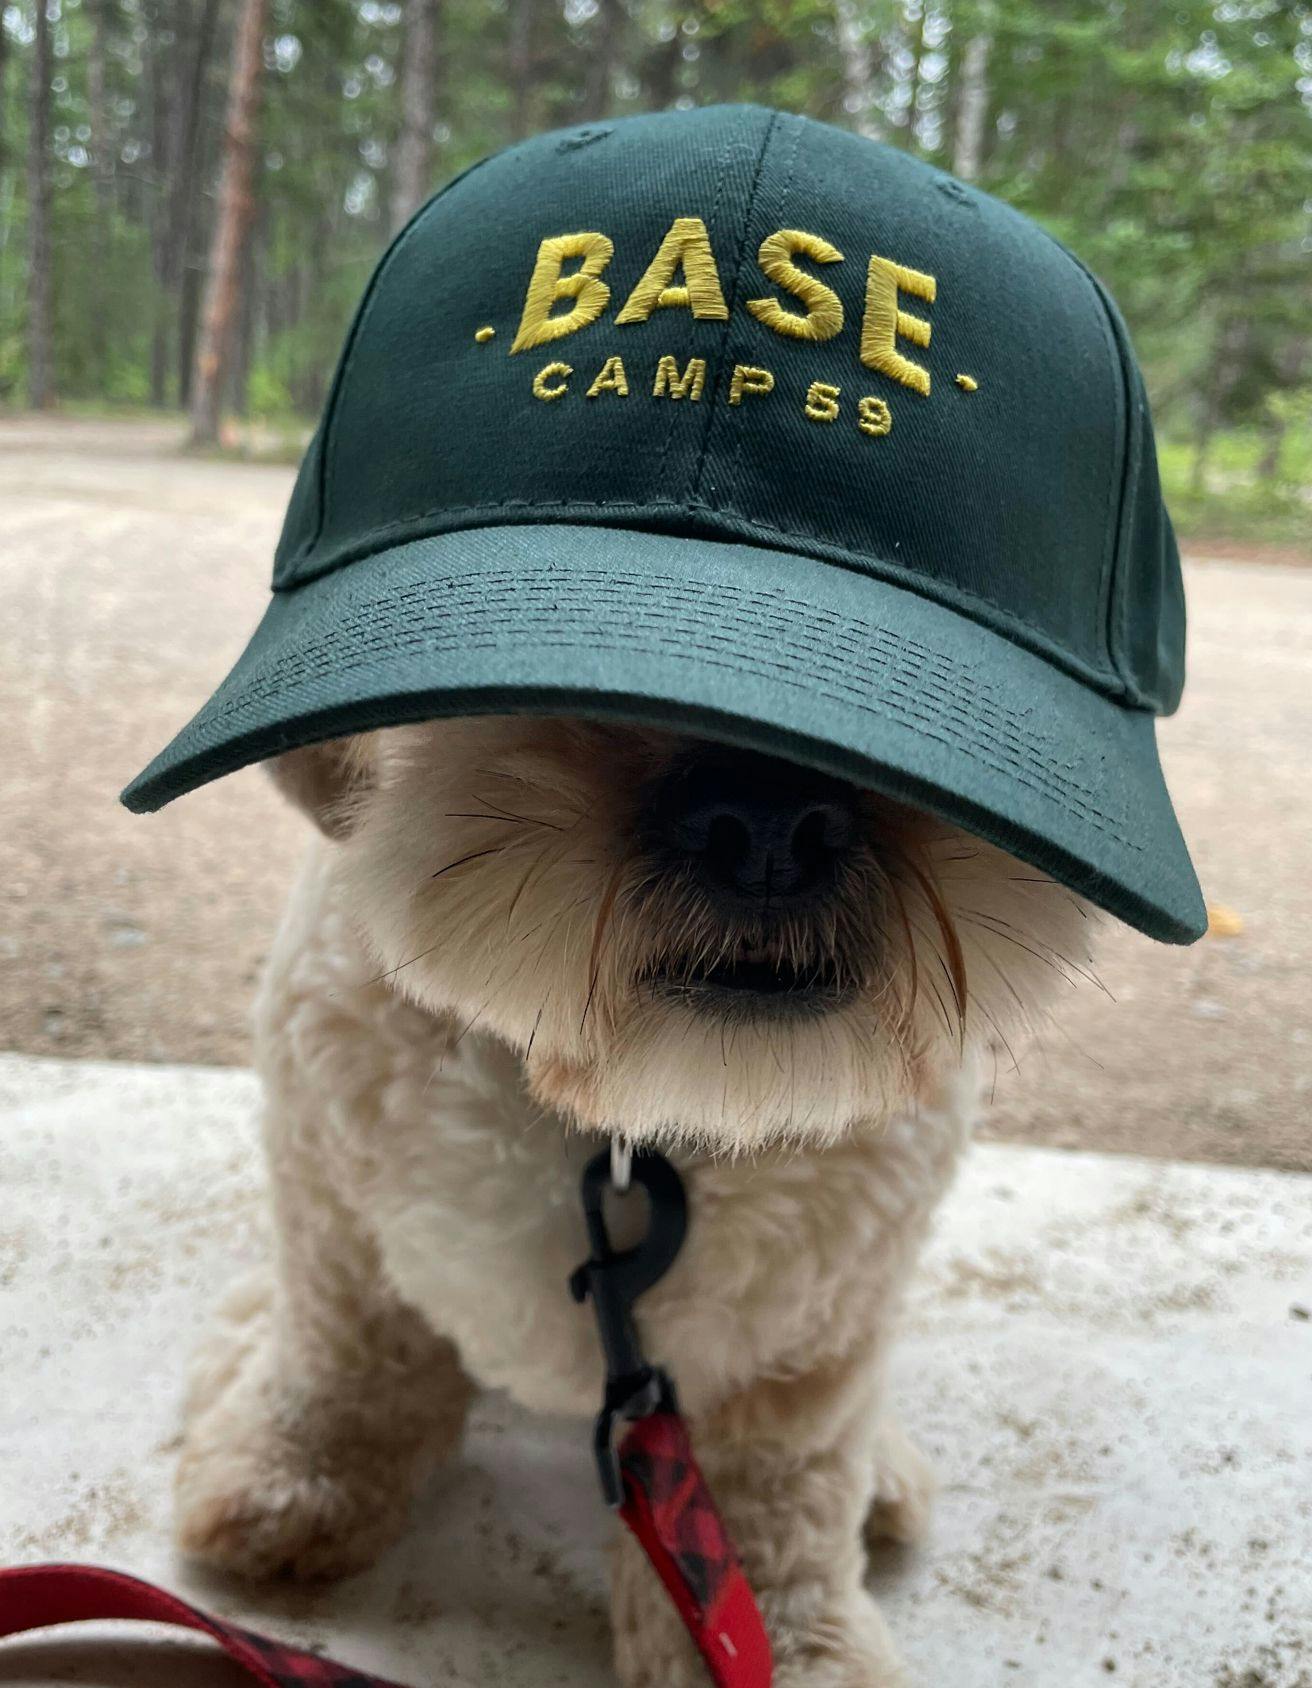 White and brown dog with a green hat that says "Base Camp 59" on its head sitting outside